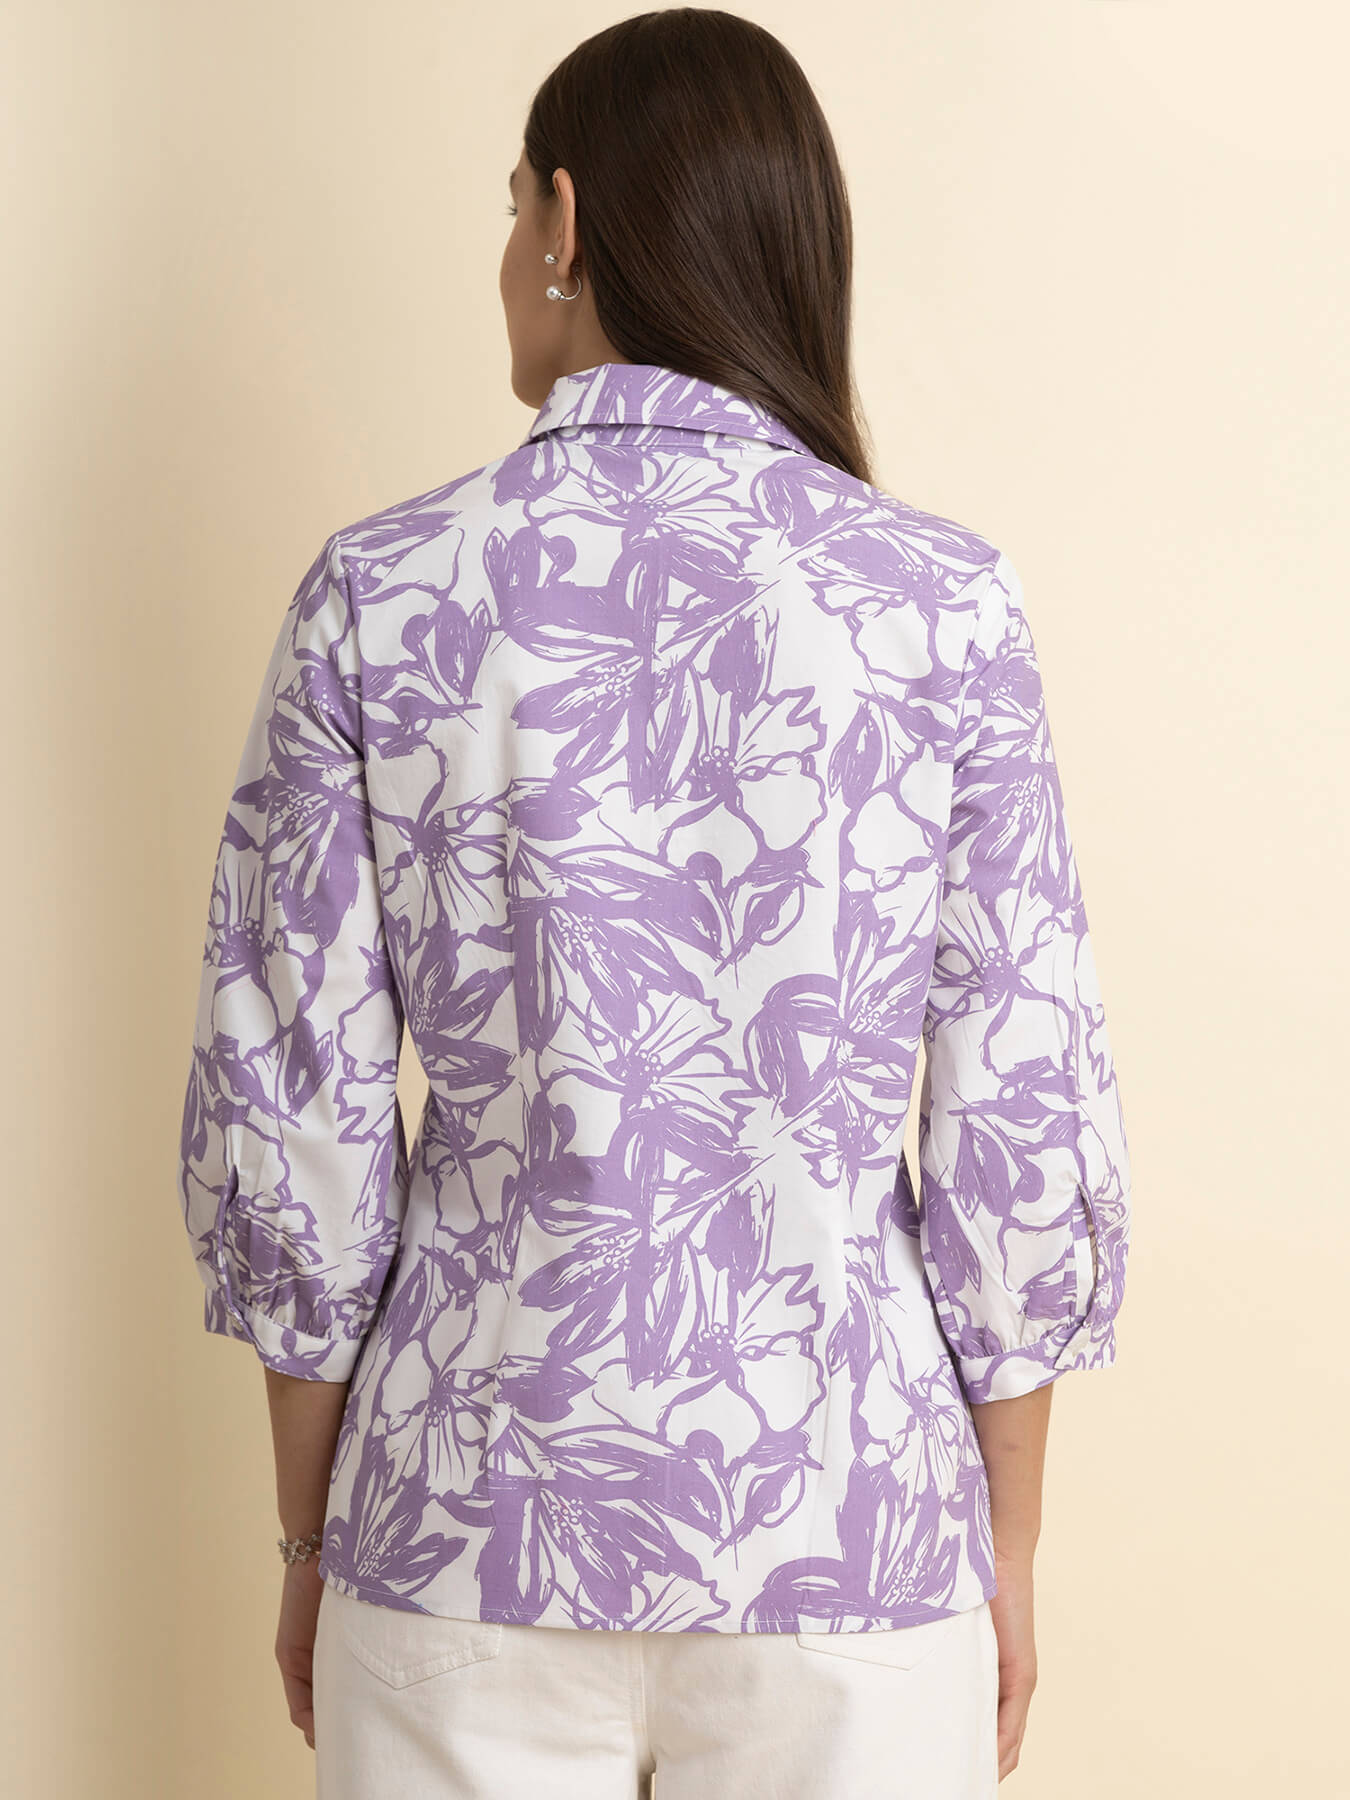 Cotton Floral Print Shirt - White And Lilac